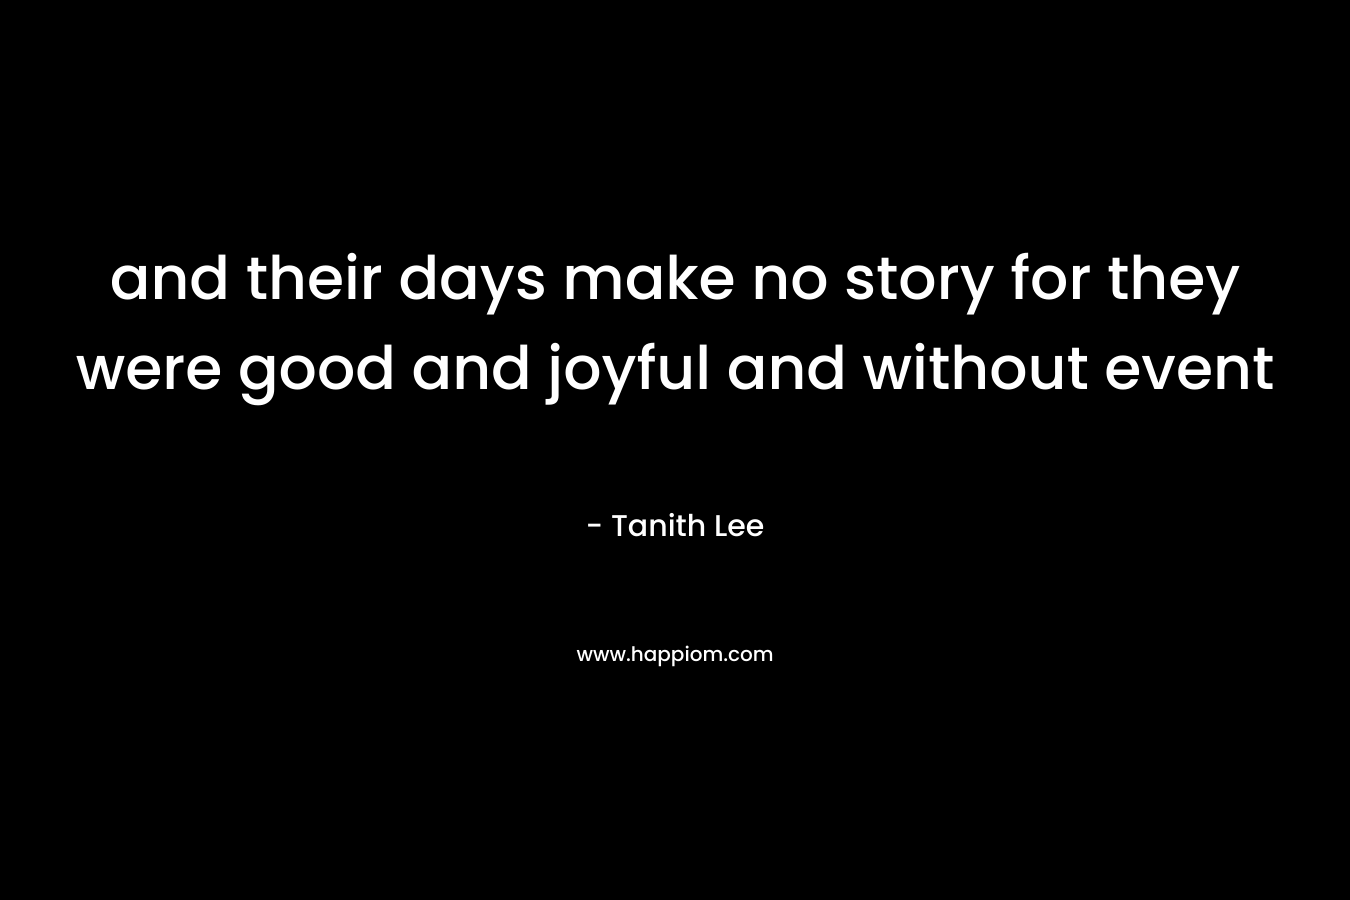 and their days make no story for they were good and joyful and without event – Tanith Lee